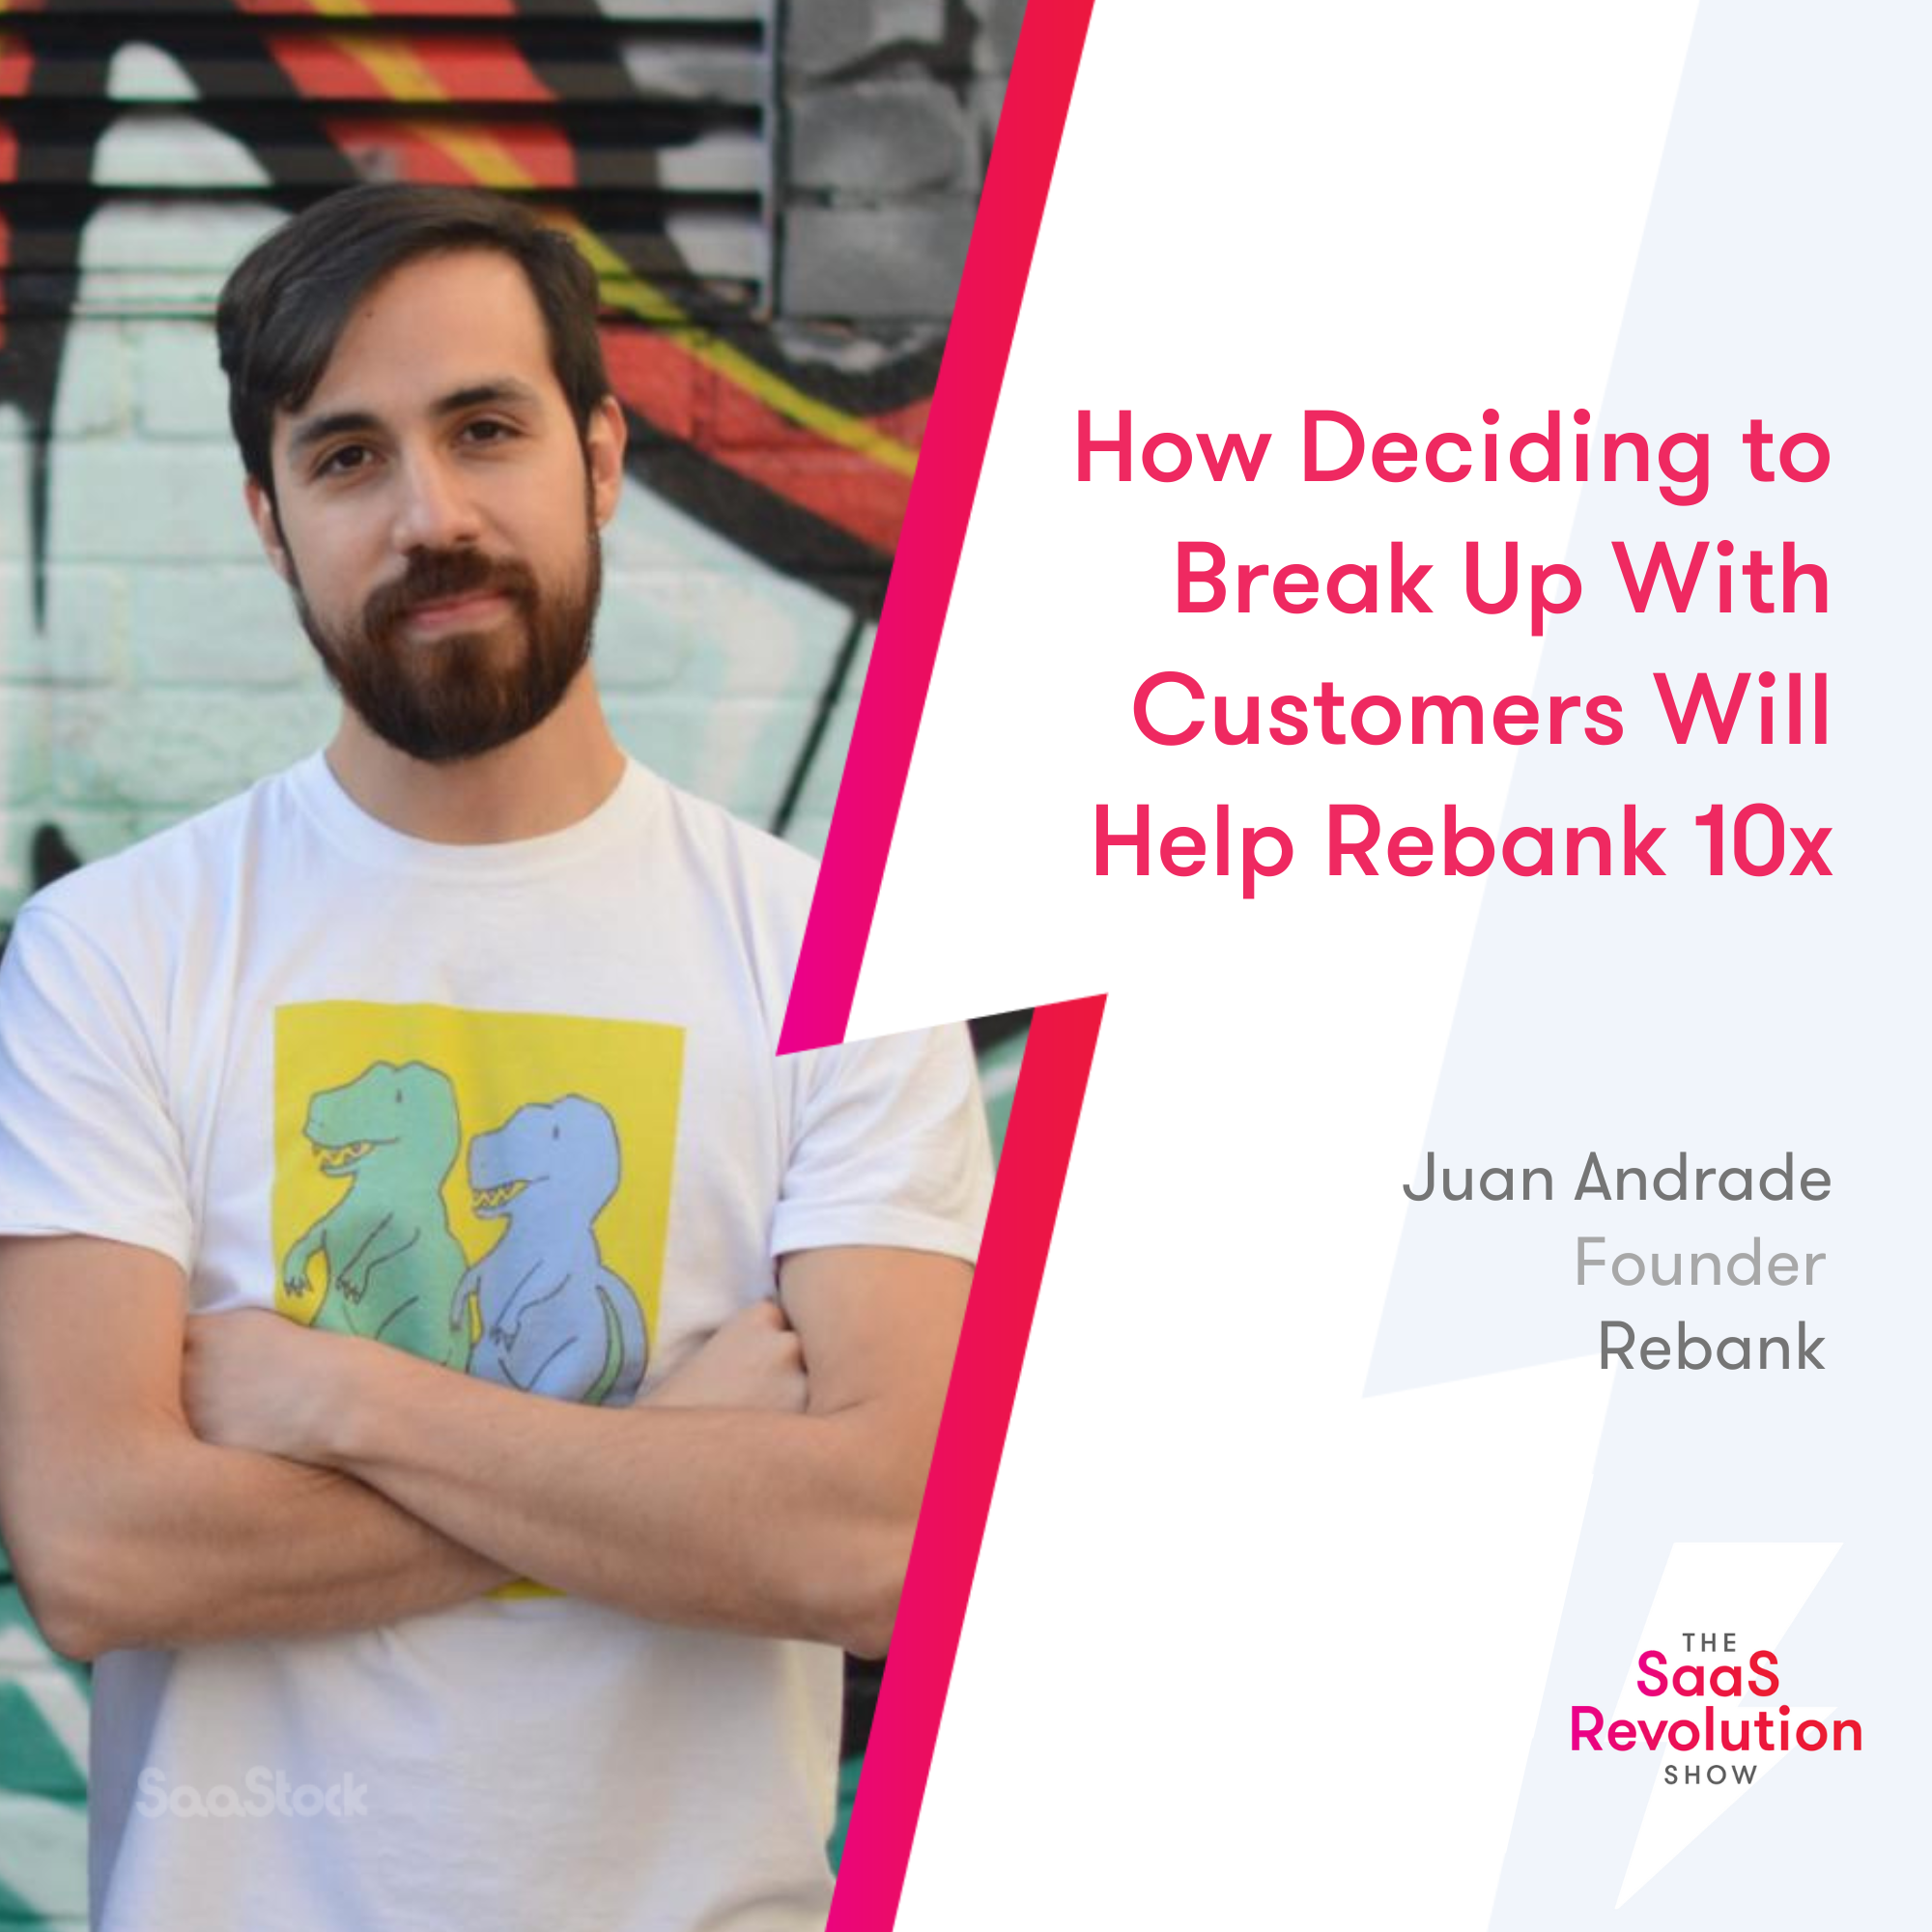 How Deciding to Break Up With Customers Will Help Rebank 10x